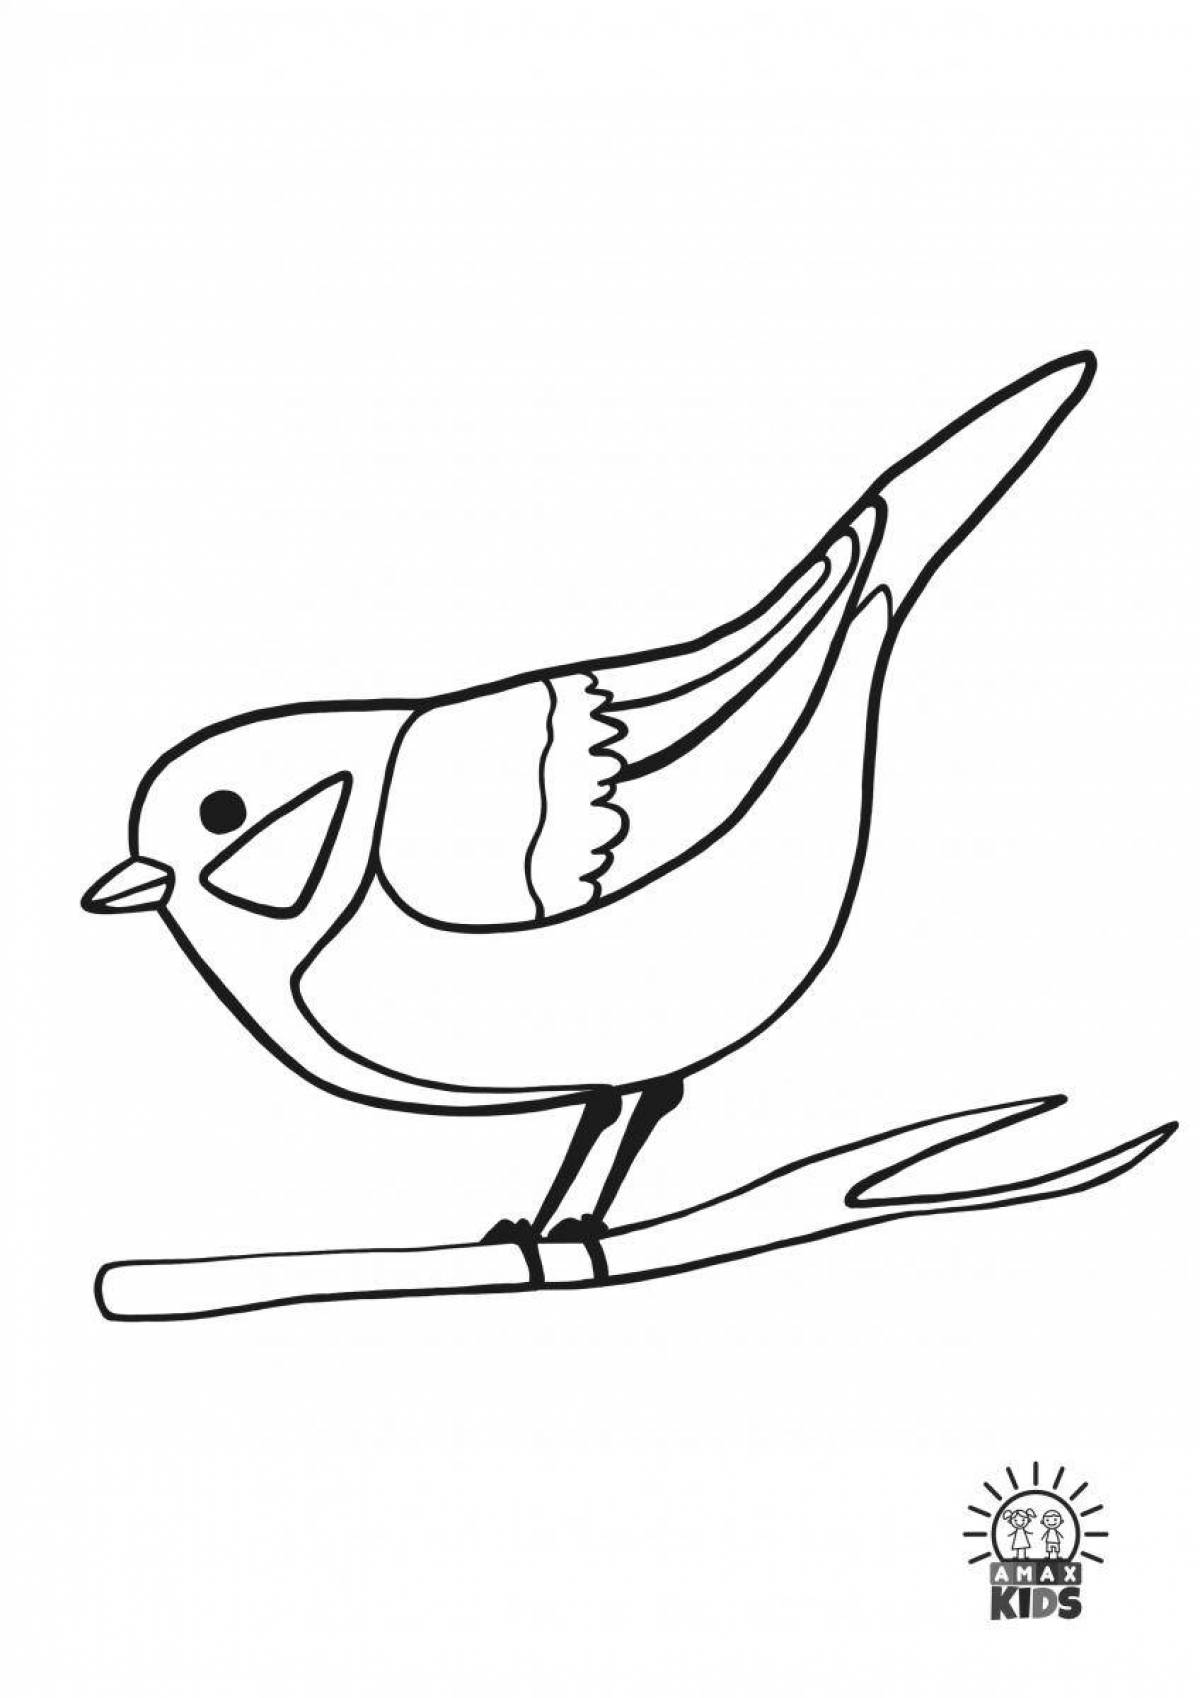 Fabulous winter birds coloring pages for kids